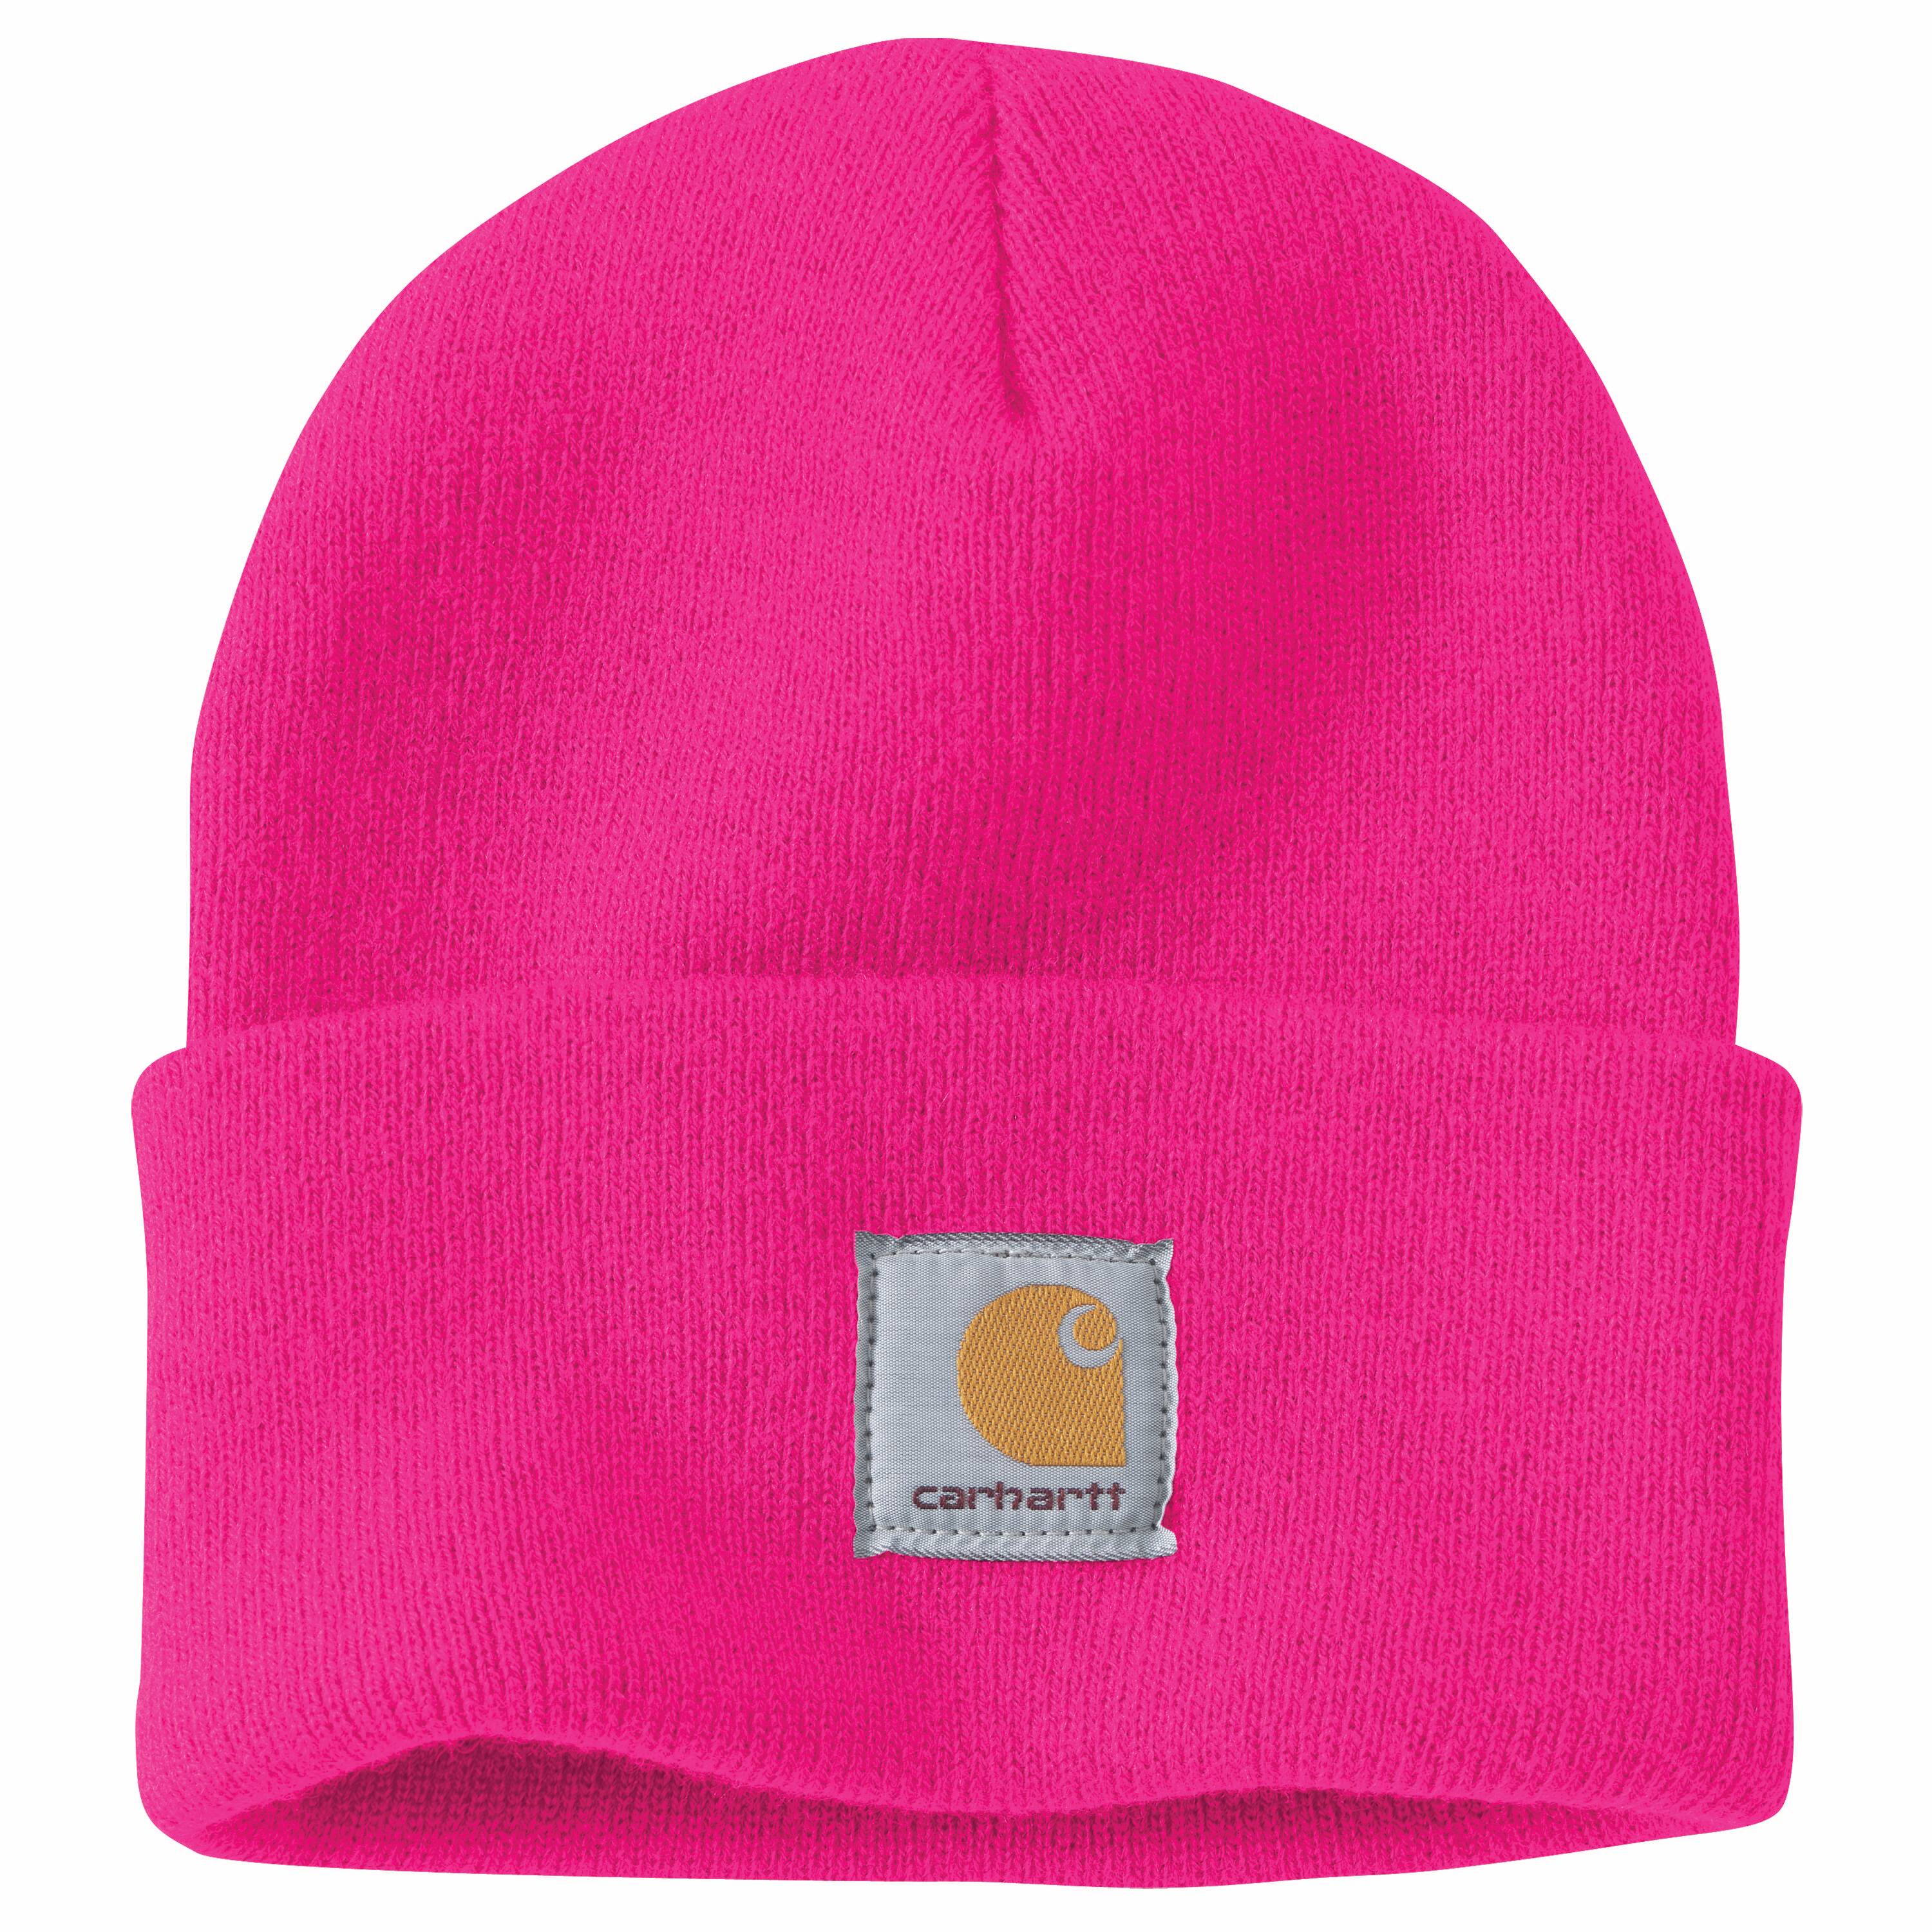 Carhartt Men's Pink Glow Acrylic Knit Hat at Lowes.com